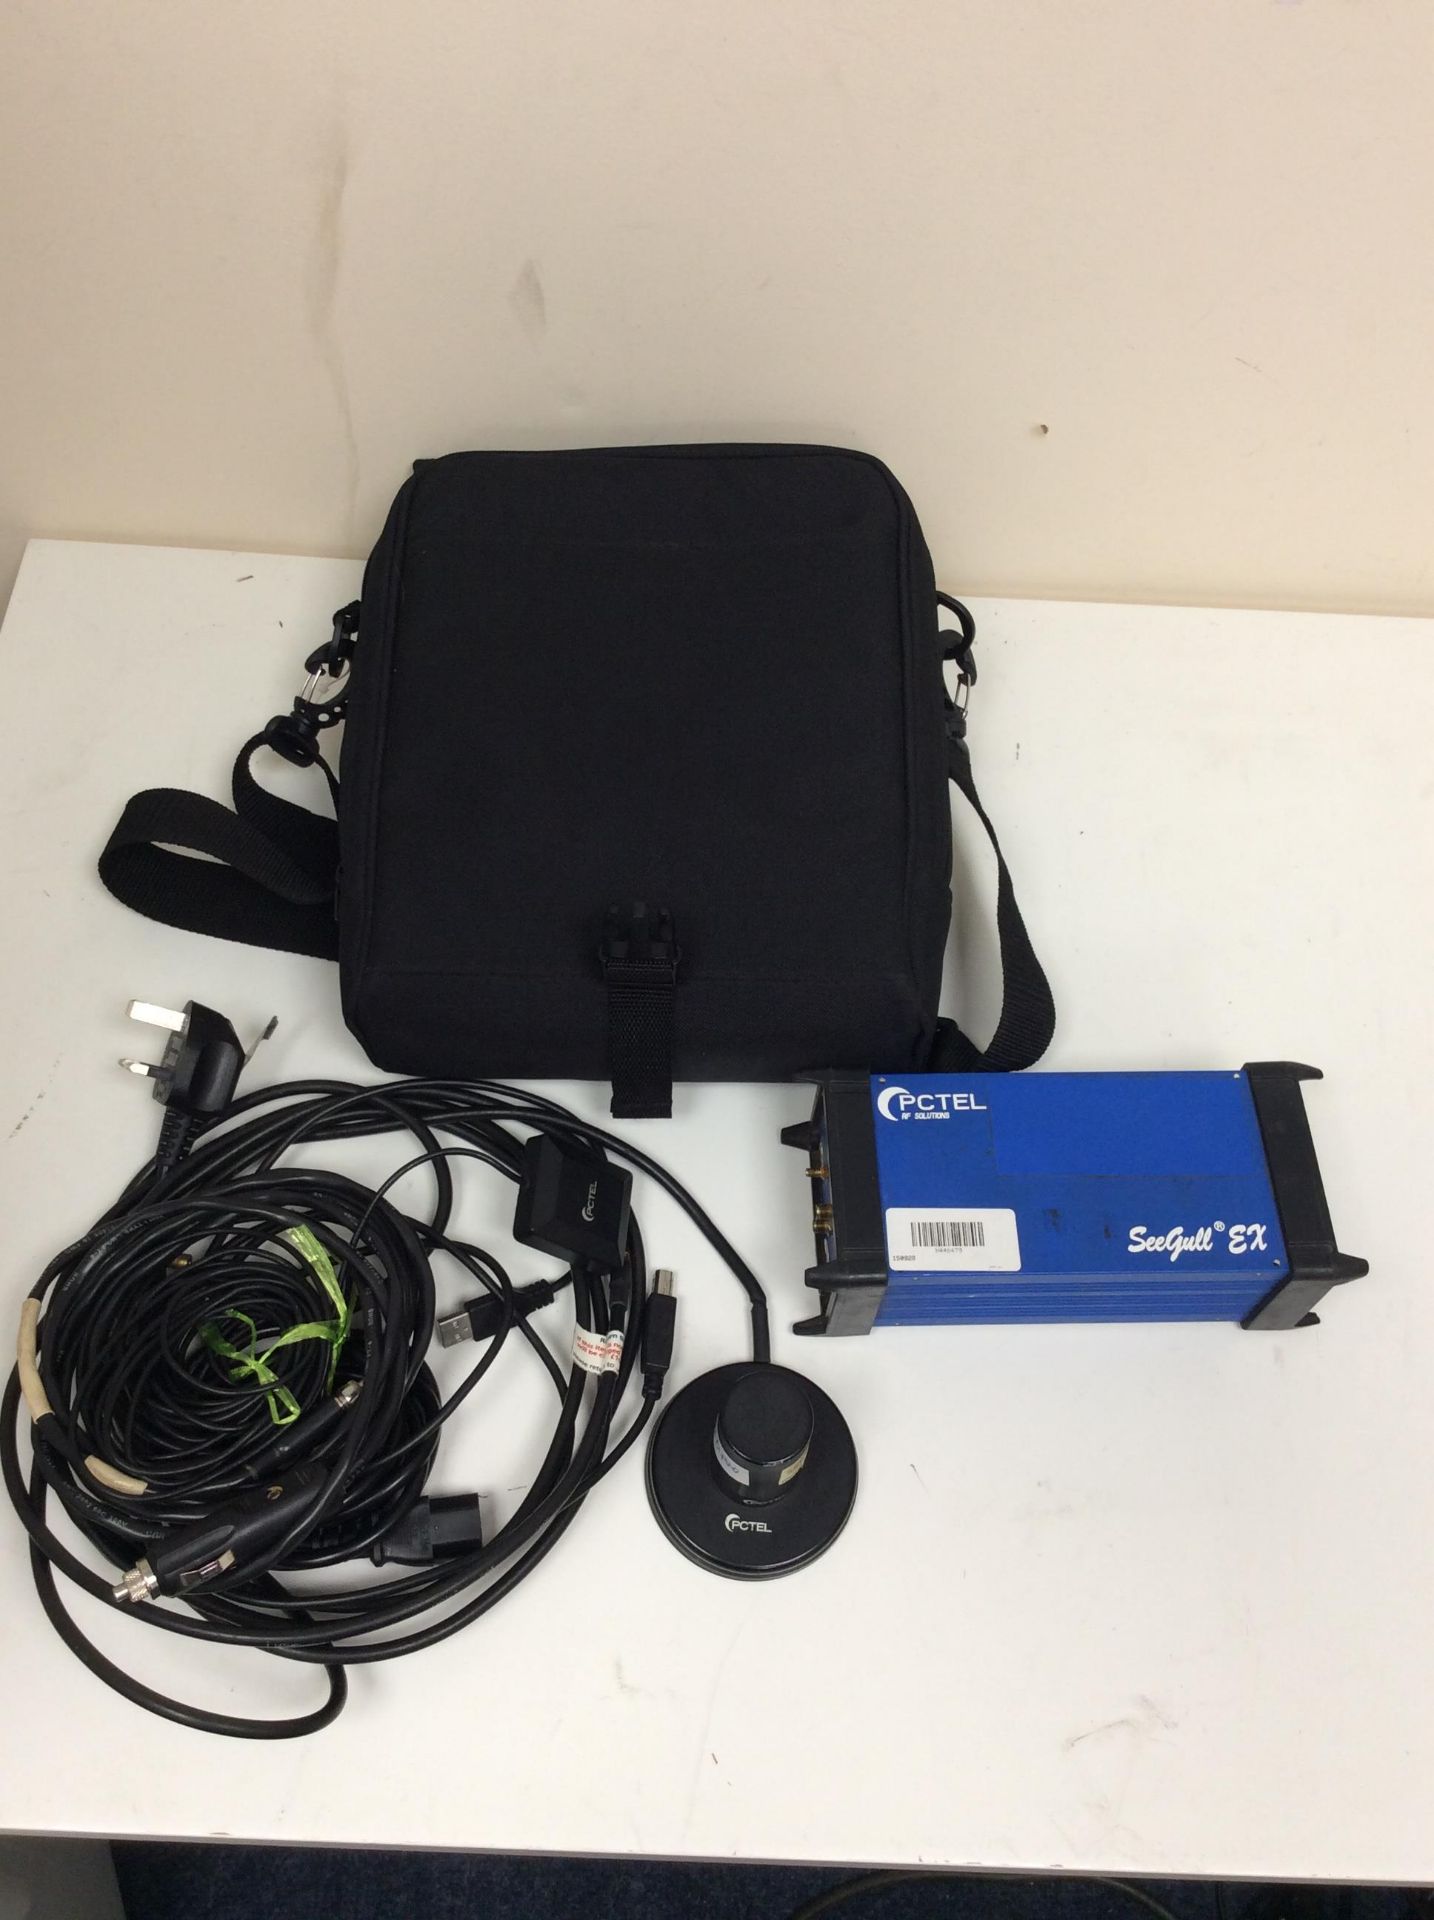 Pctel seegull ex scanning receiver is95 cdma 2000 is856 lte ev-do gps op211 band